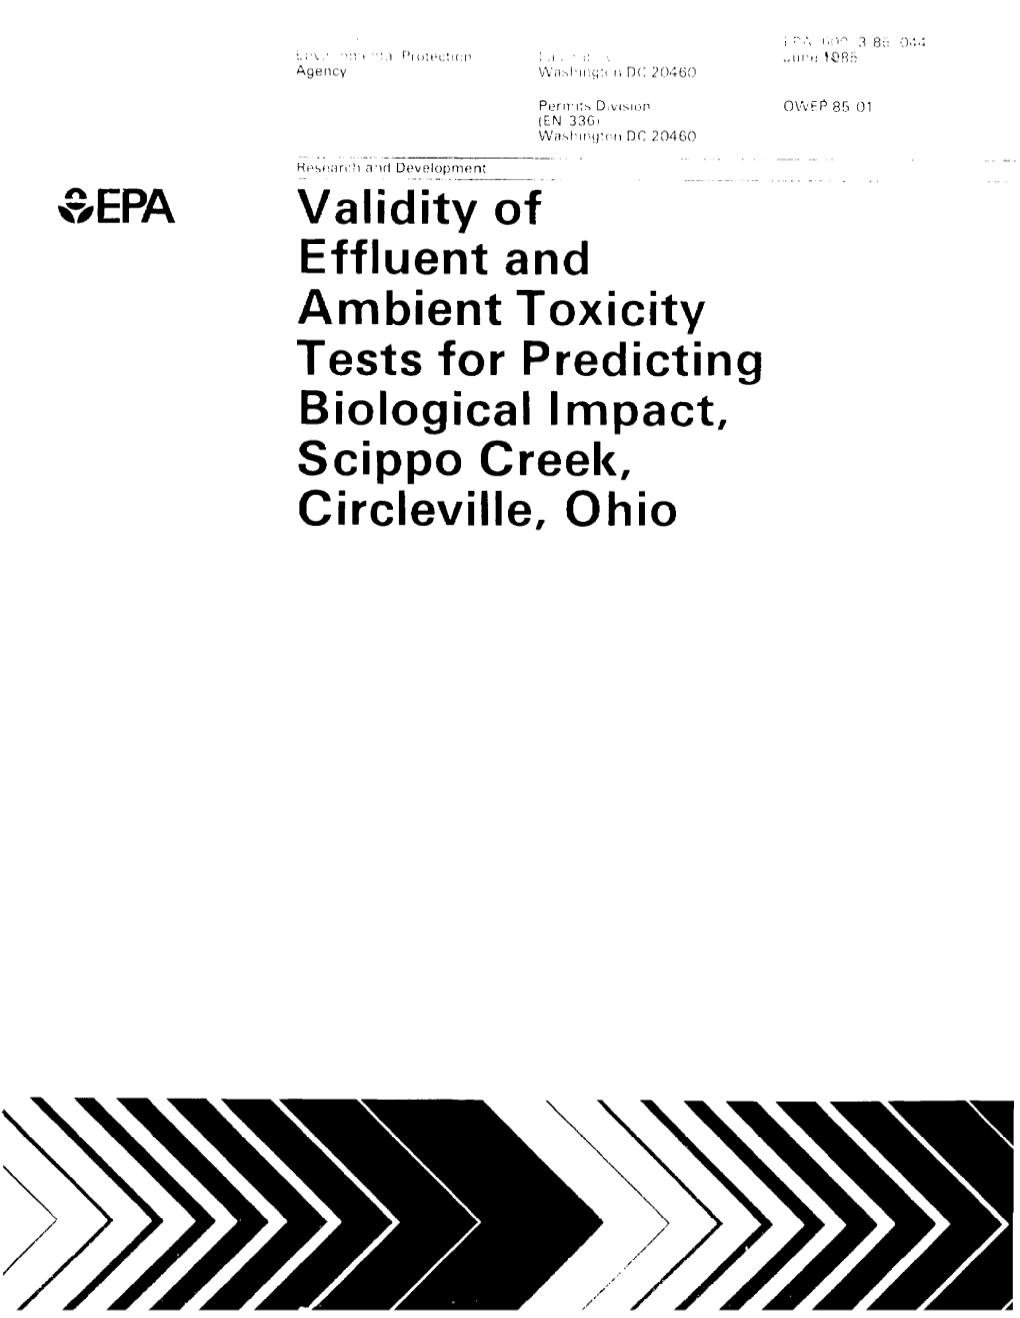 The Validity of Effluent and Ambient Toxicity Tests for Predicting